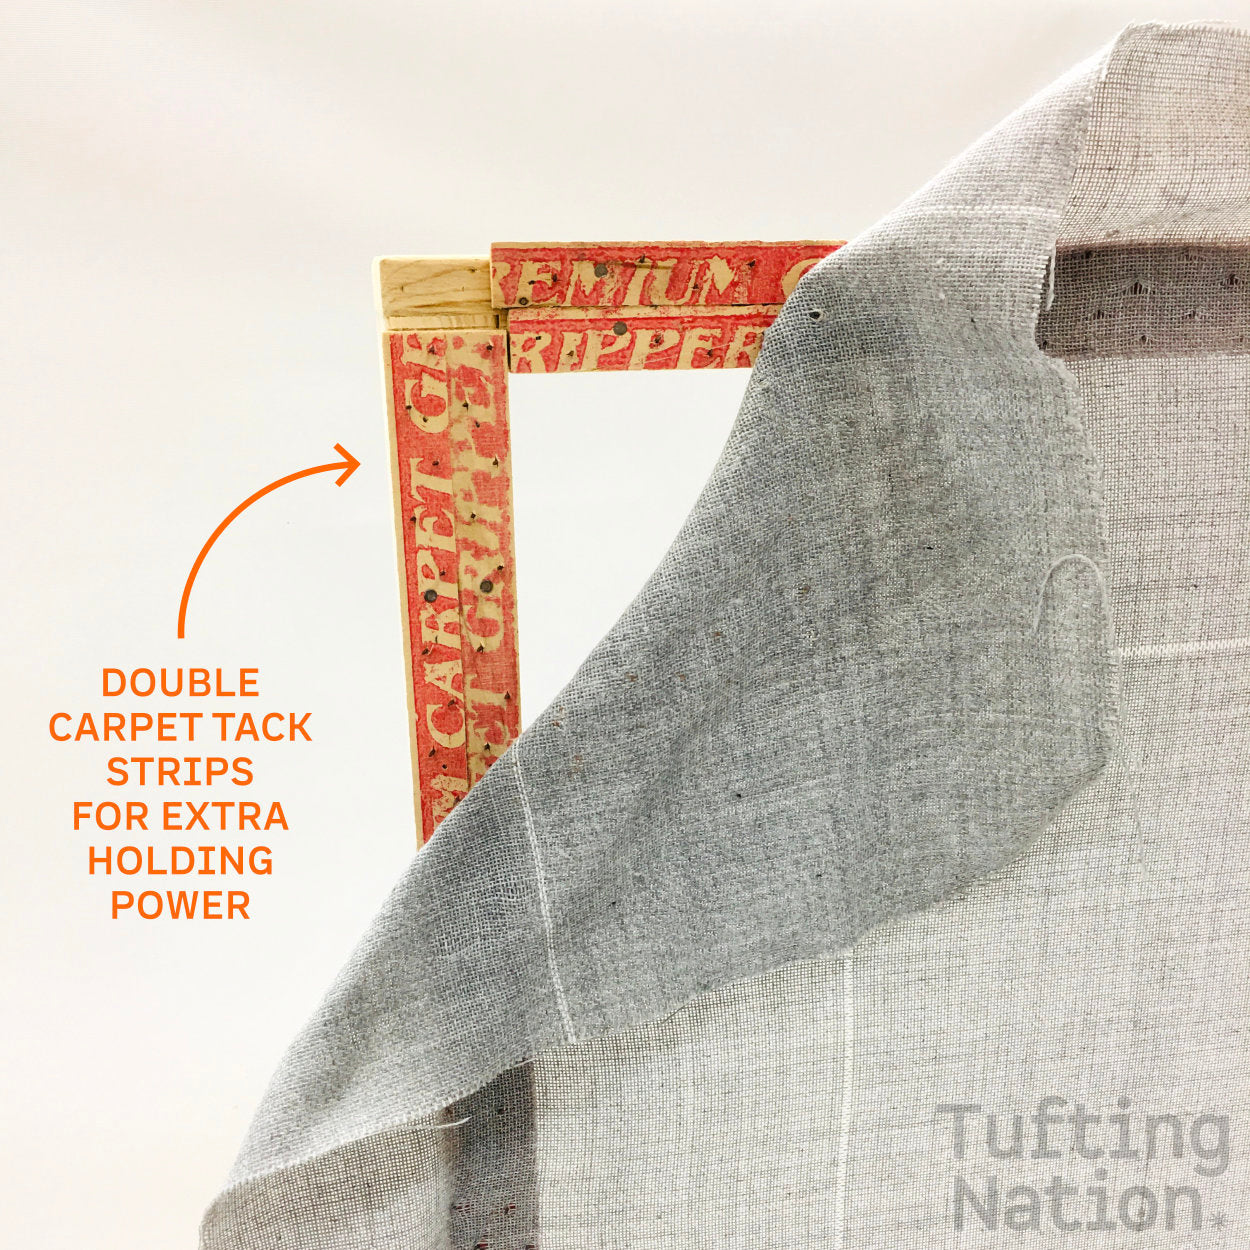 Double Carpet Tack Strips fro Extra Holding Power on TuftingNation's Tufting Frame